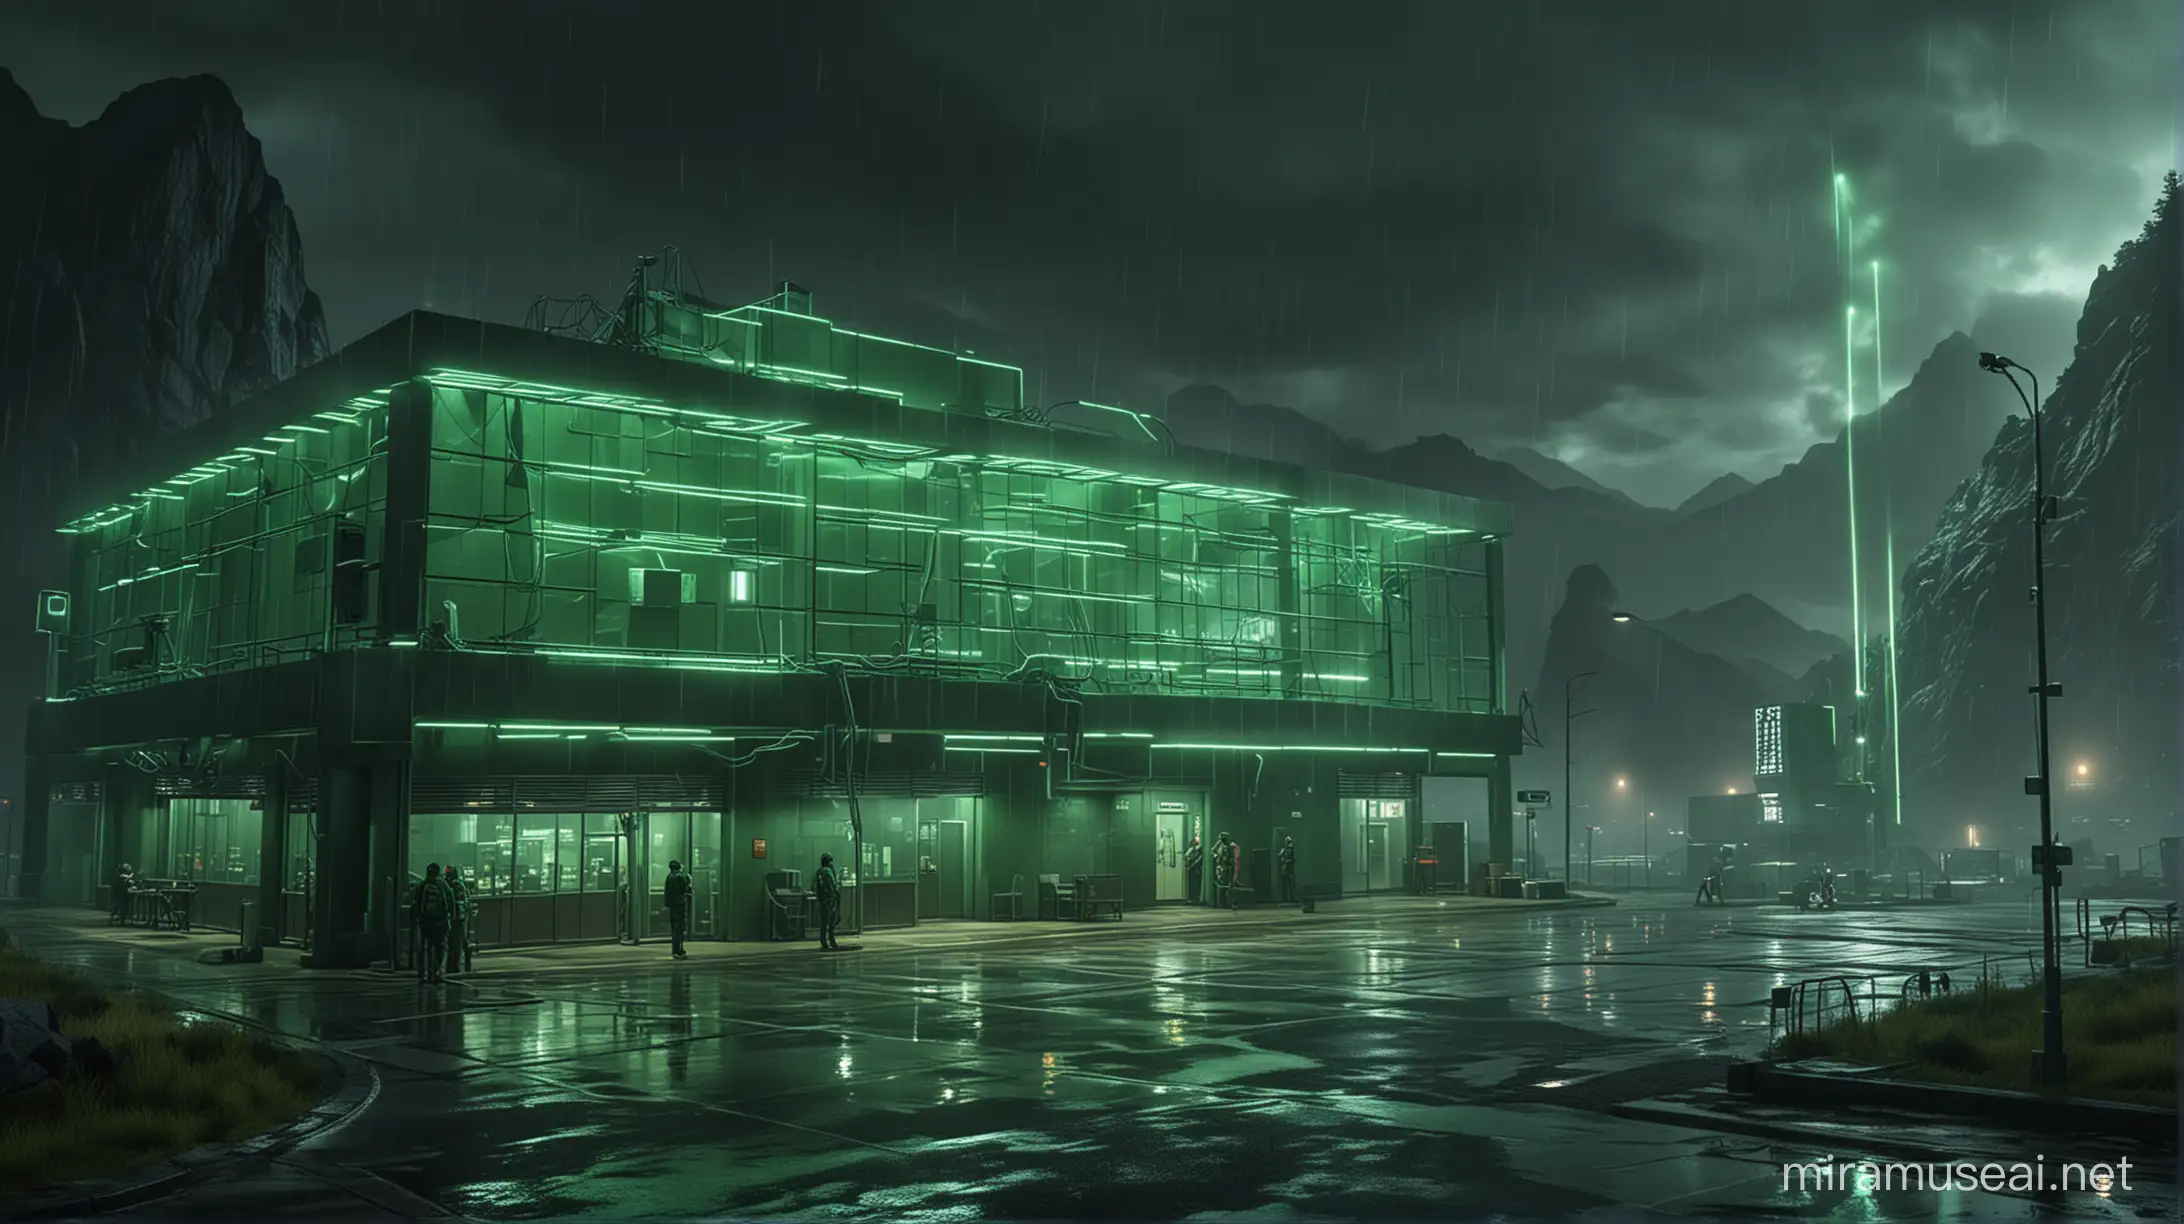 Realistic research centers with one worker around it, green neon and huge neon lights inside the part, its color shadow on the floor, Rainy weather, staff in dark green uniforms and helmets, Atmospheric and cinematic, The huge structures, A dark green smoke rose from the research centers environment and spread in the air, The image space is outside the realistic research center.
with huge satellite antennas,
A huge cubic green neon object,
in the Realistic mountains.
atmospheric and cinematic.
All overall dark green image theme.
Very big lights and lots of green neon lights.
The neon lights in the image should be very bright throughout the image.
The neon lights in the picture should be very bright in the dark
The neon lights in the picture should be very bright.
Very large and bright neon lamps in the structure.
Shades of green throughout the image.
3D.
Several large buildings nearby.